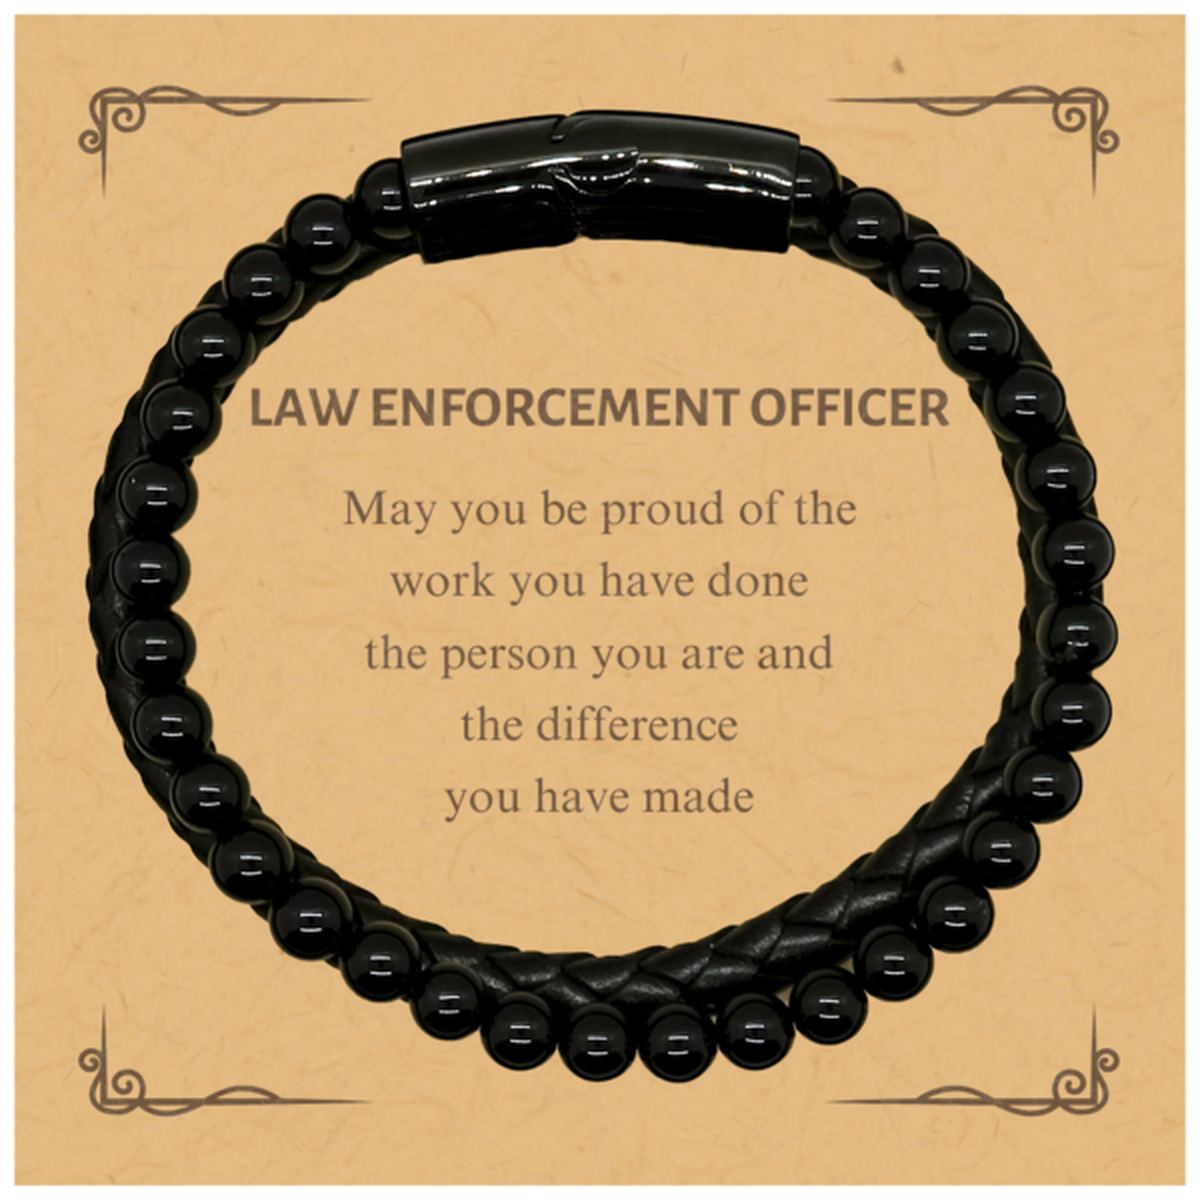 Law Enforcement Officer May you be proud of the work you have done, Retirement Law Enforcement Officer Stone Leather Bracelets for Colleague Appreciation Gifts Amazing for Law Enforcement Officer